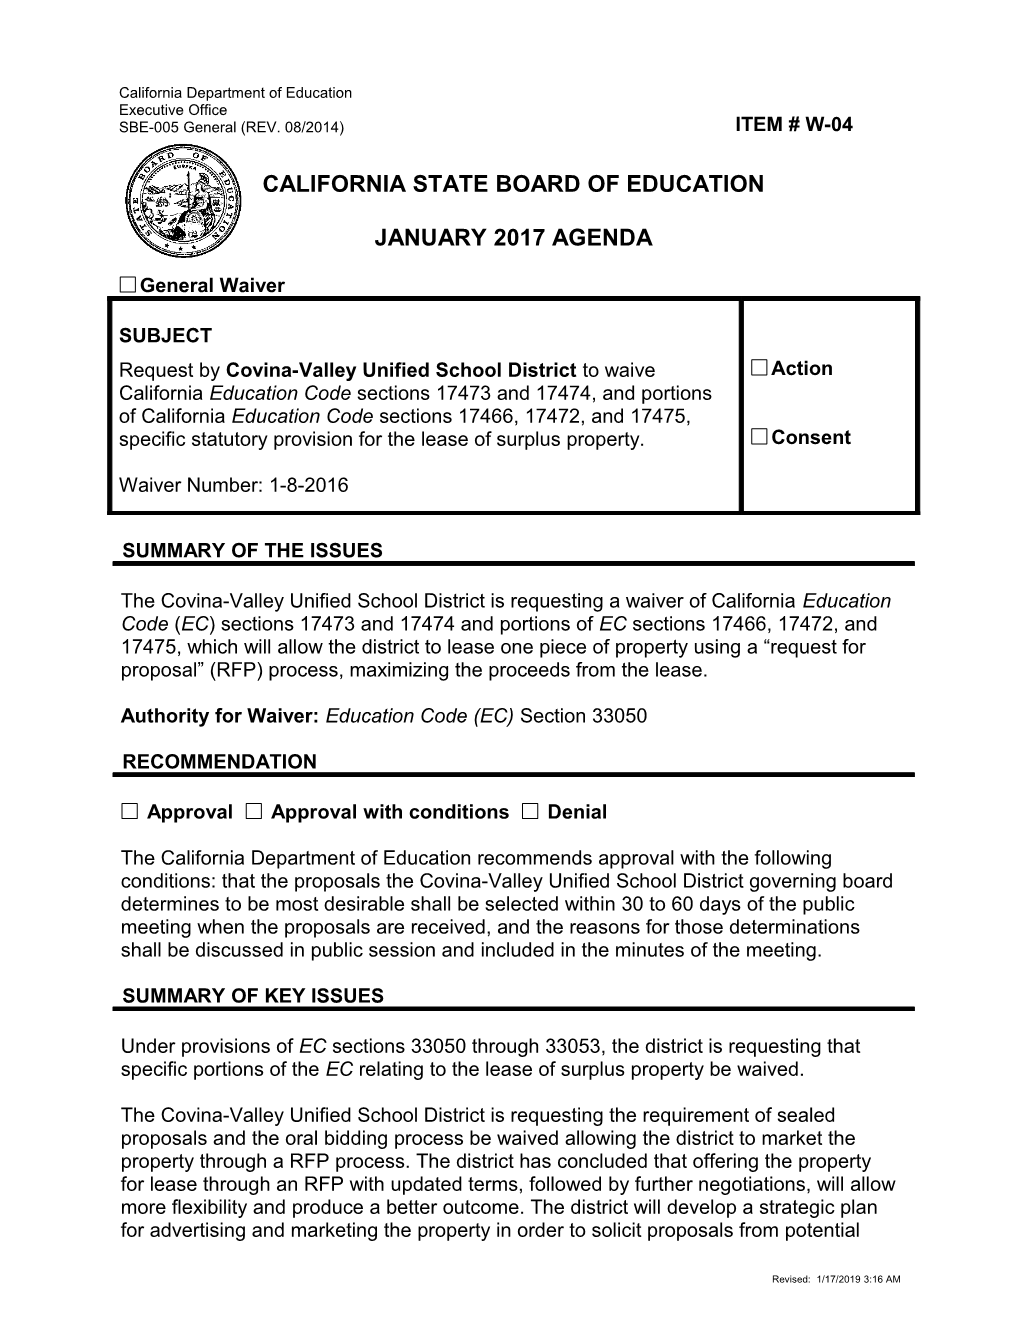 January 2017 Waiver Item W-04 - Meeting Agendas (CA State Board of Education)